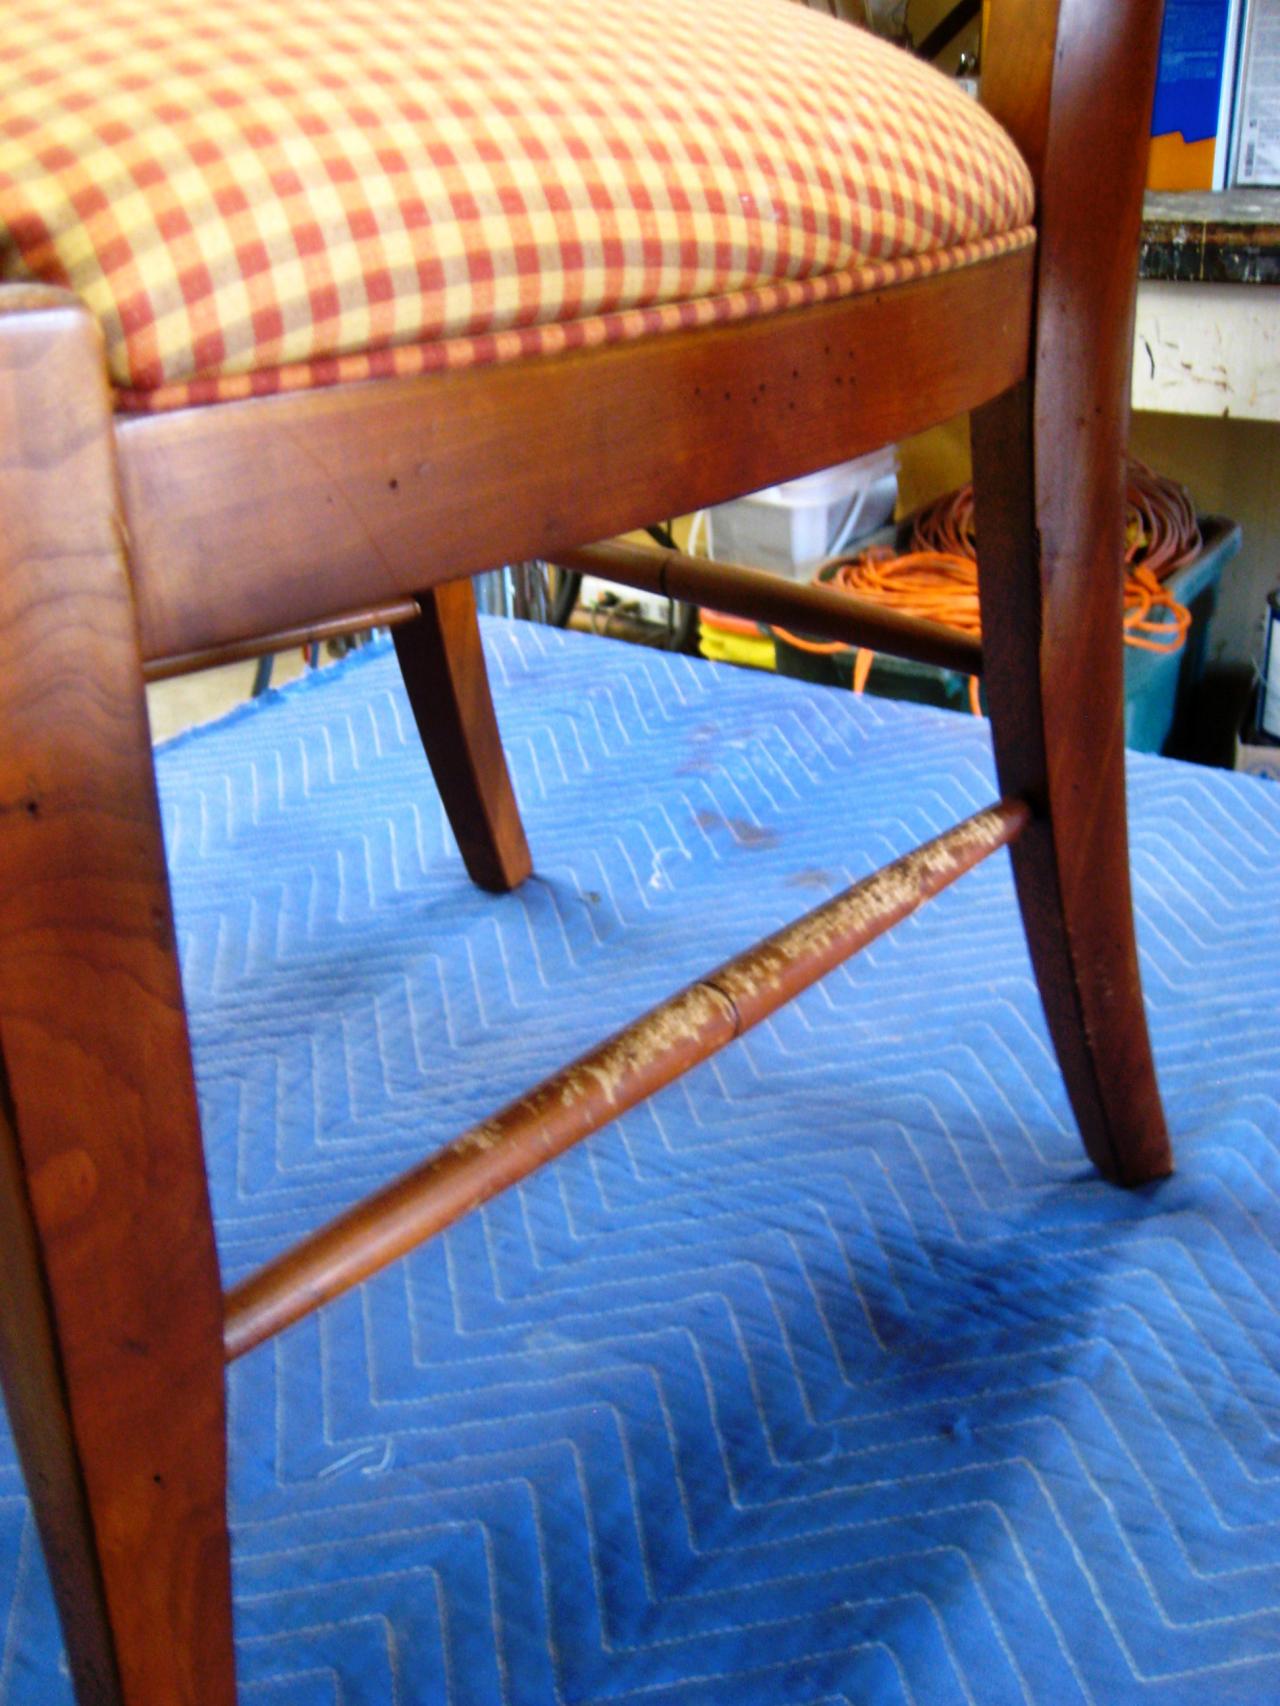 How To Repair Wood Furniture That Has, How To Fix Wooden Dining Chair Legs